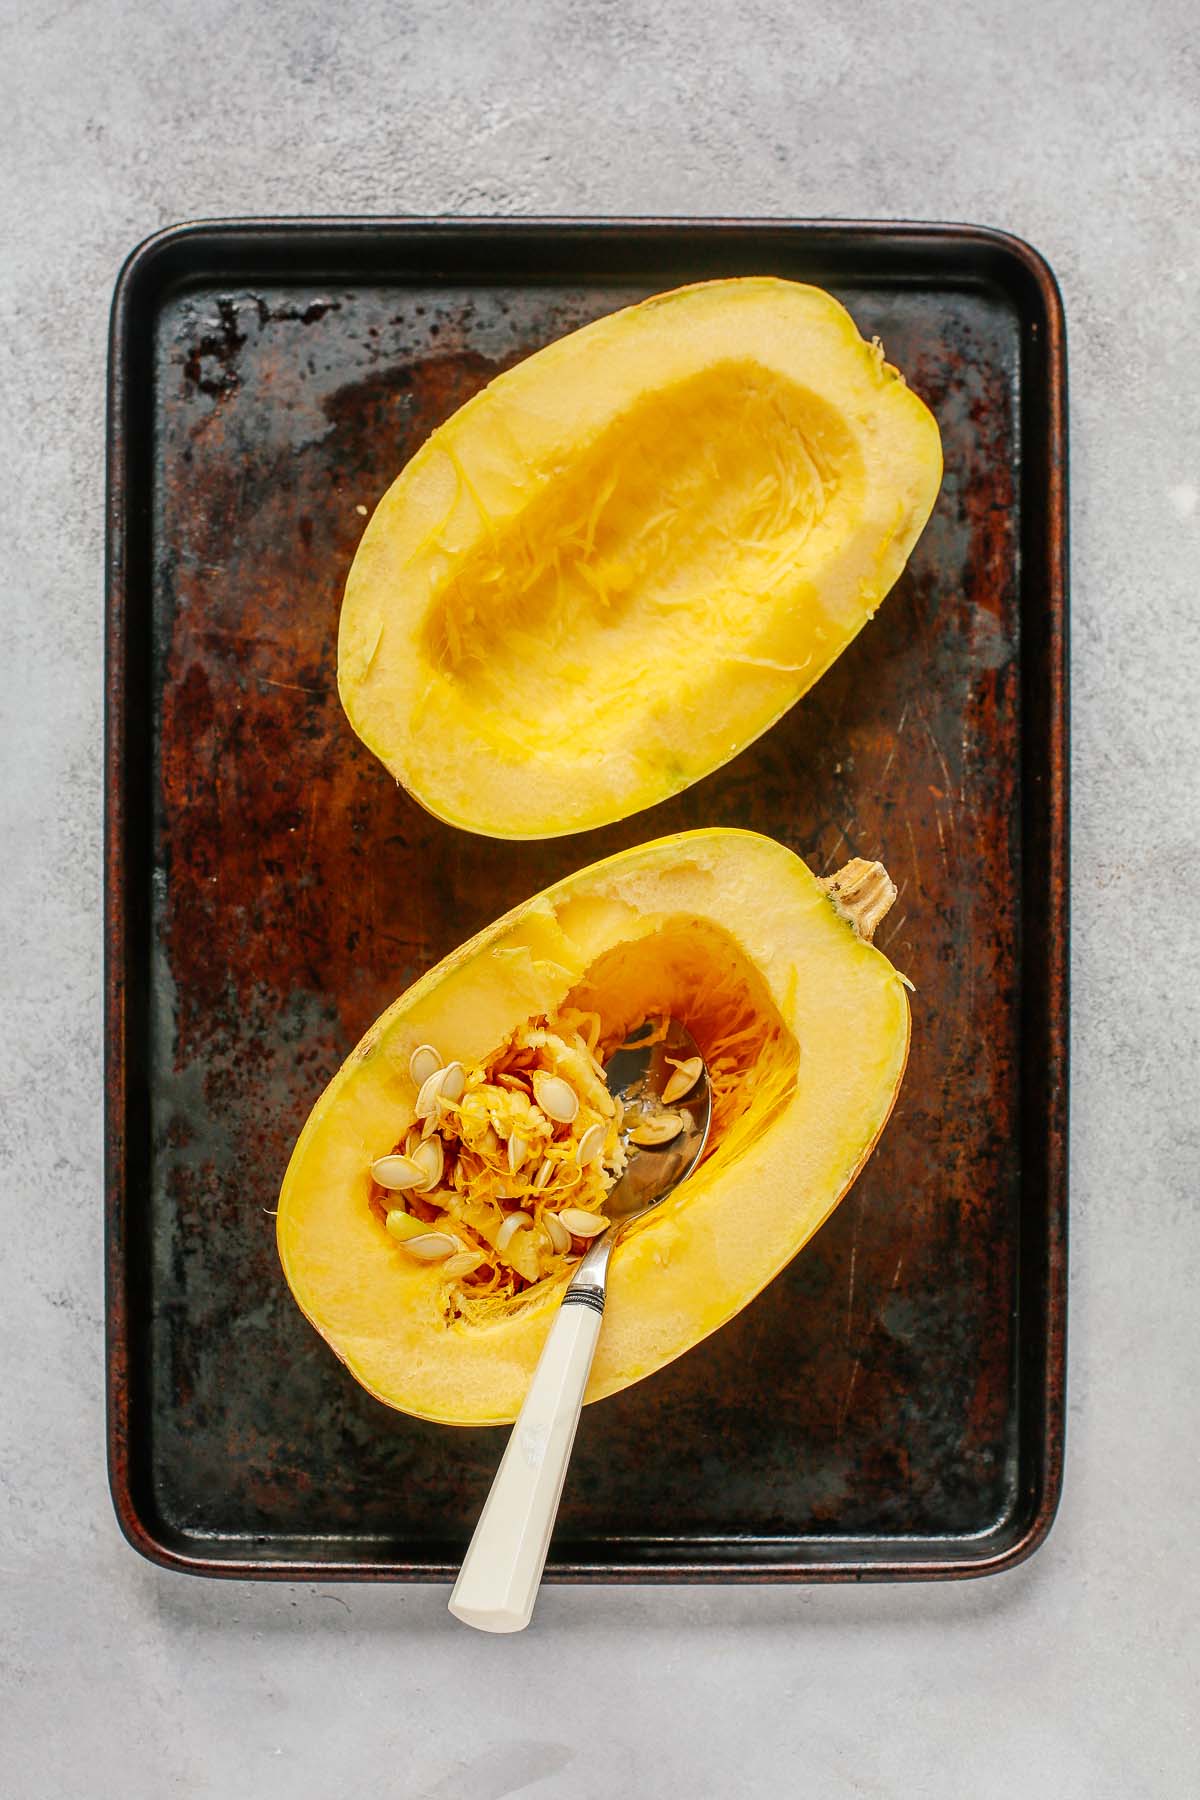 spaghetti squash without the seeds